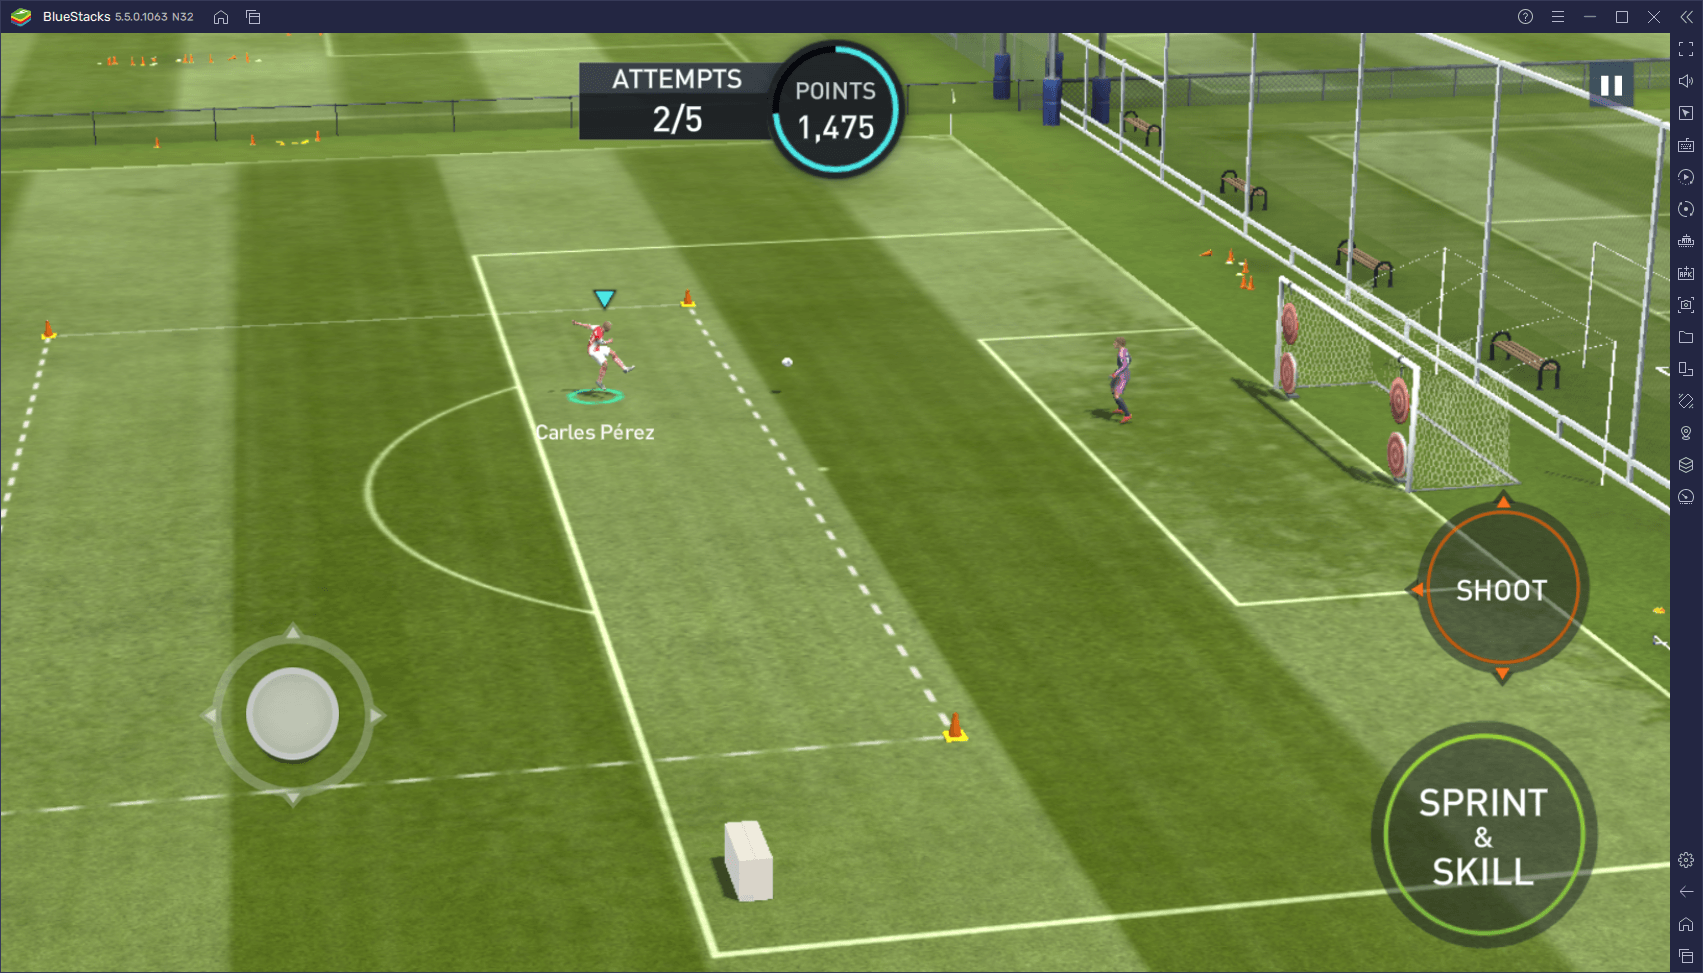 How to Play FIFA Soccer on PC with BlueStacks